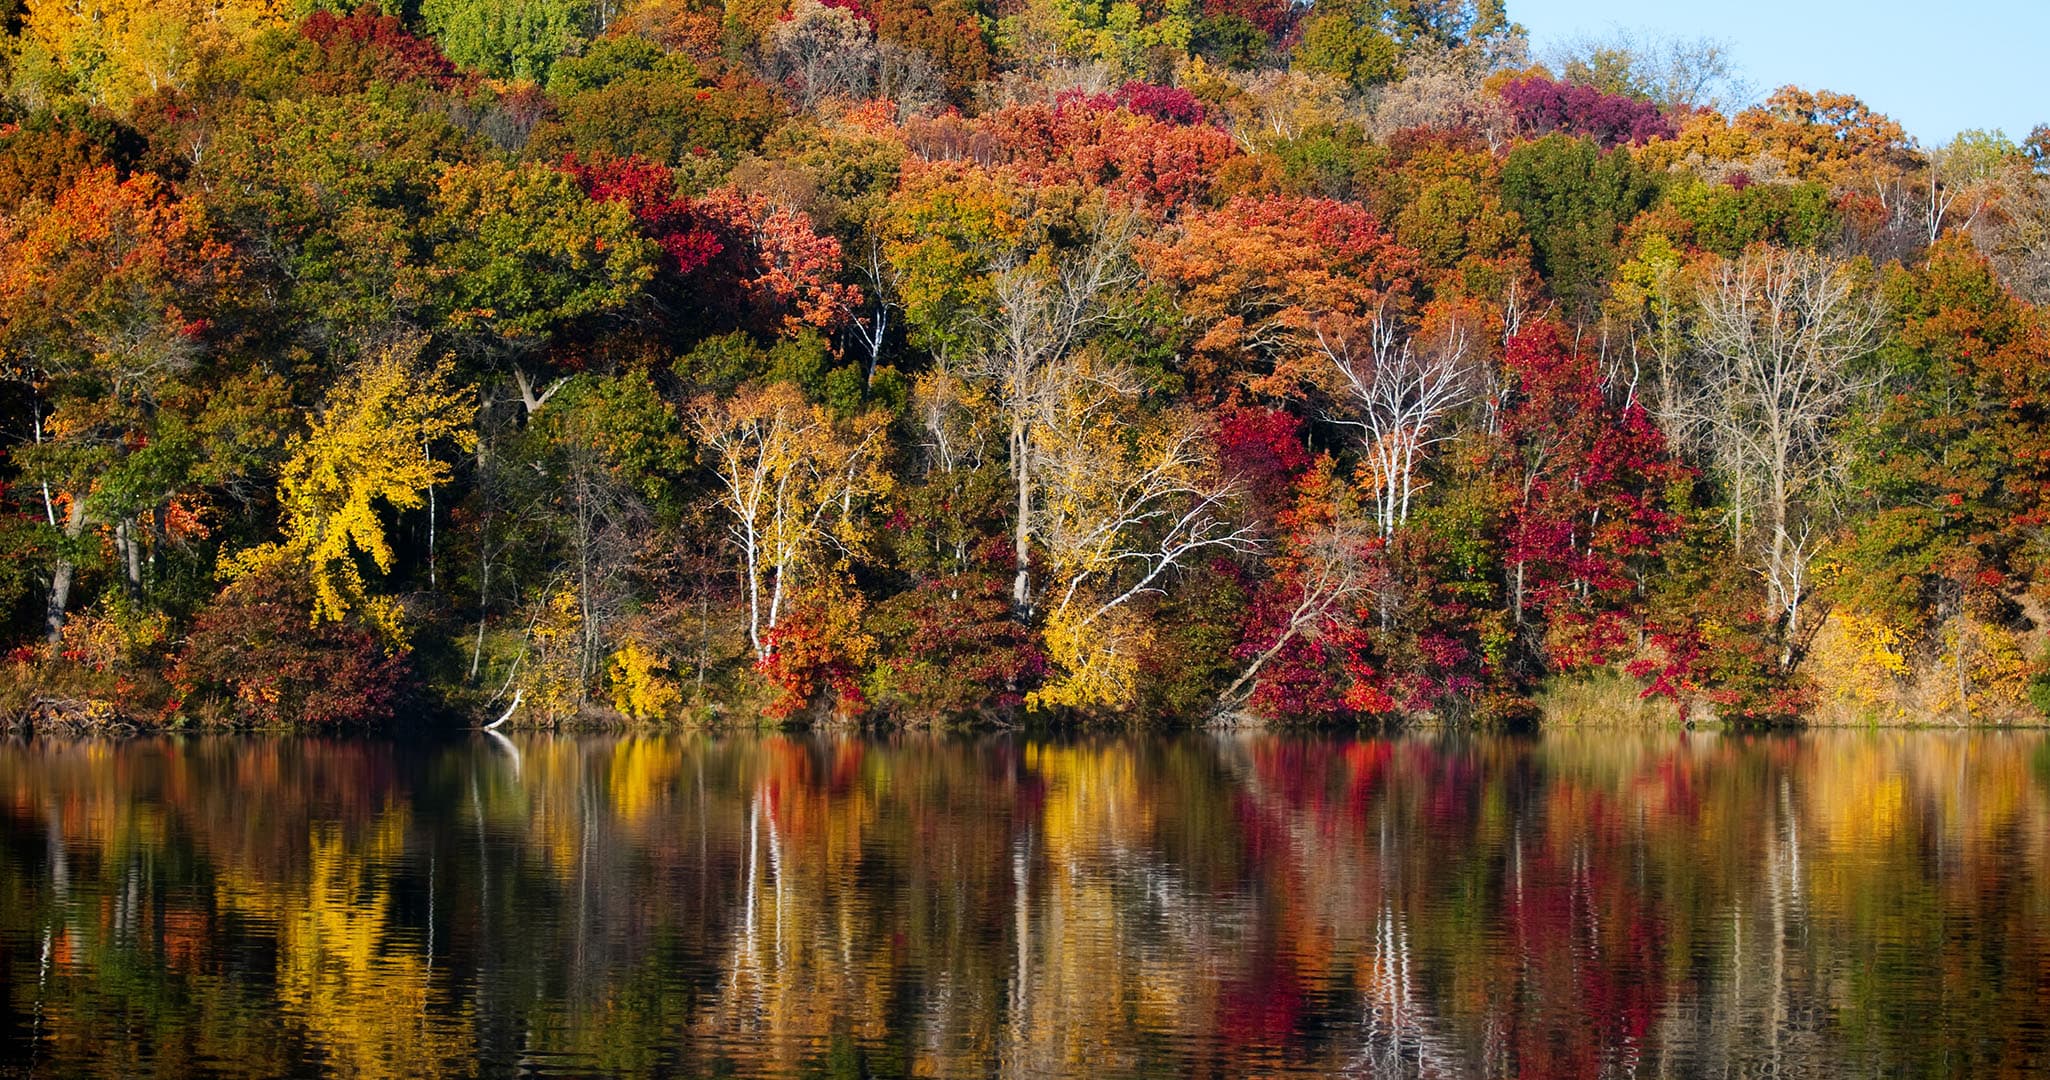 Autumn colored forrest at the edge of a lake.